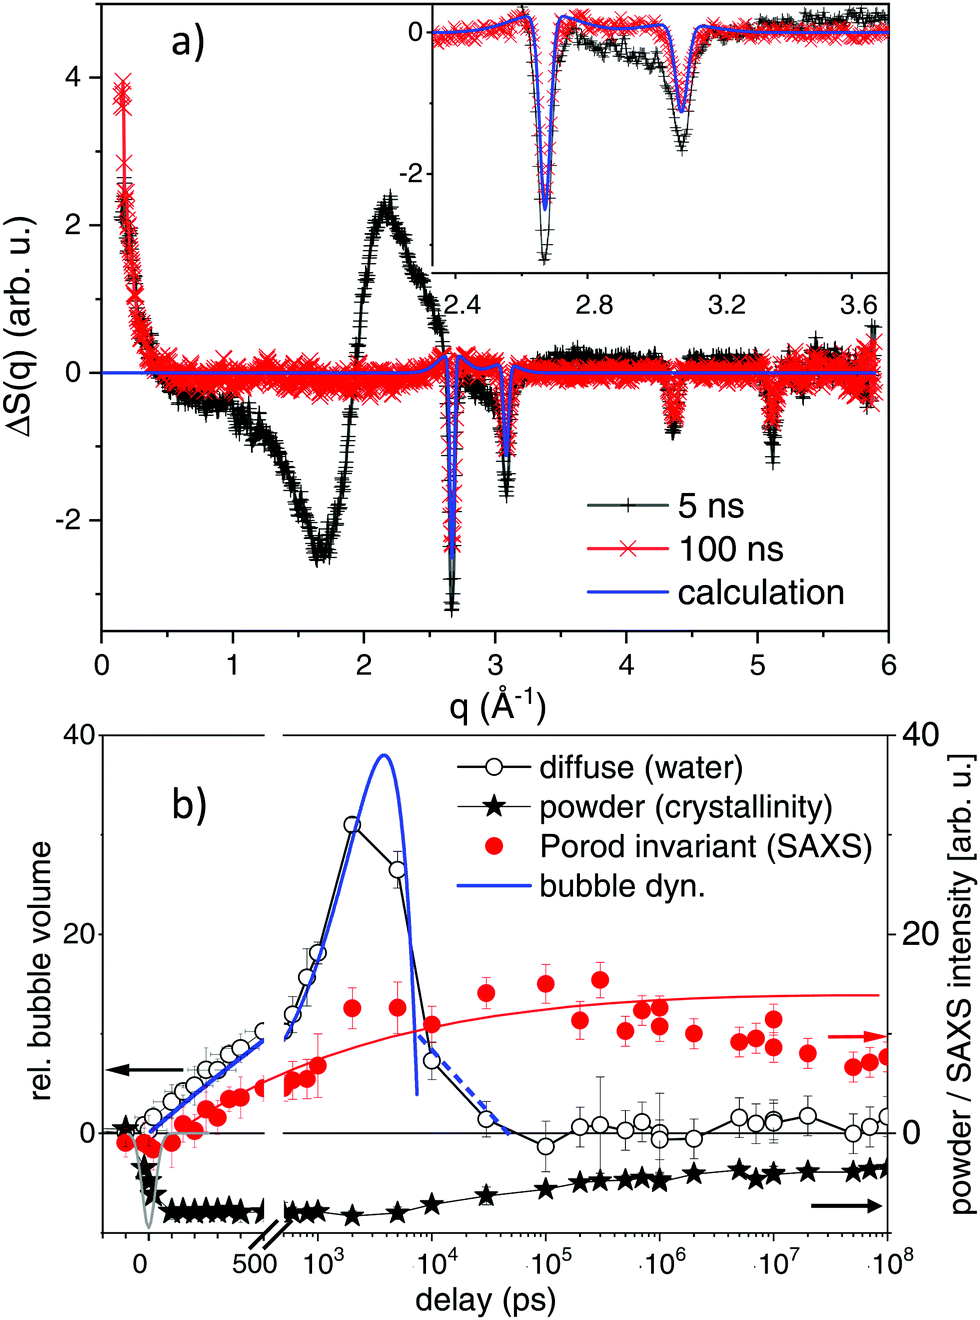 In Situ Structural Kinetics Of Picosecond Laser Induced Heating And Fragmentation Of Colloidal Gold Spheres Physical Chemistry Chemical Physics Rsc Publishing Doi 10 1039 C9cp052j